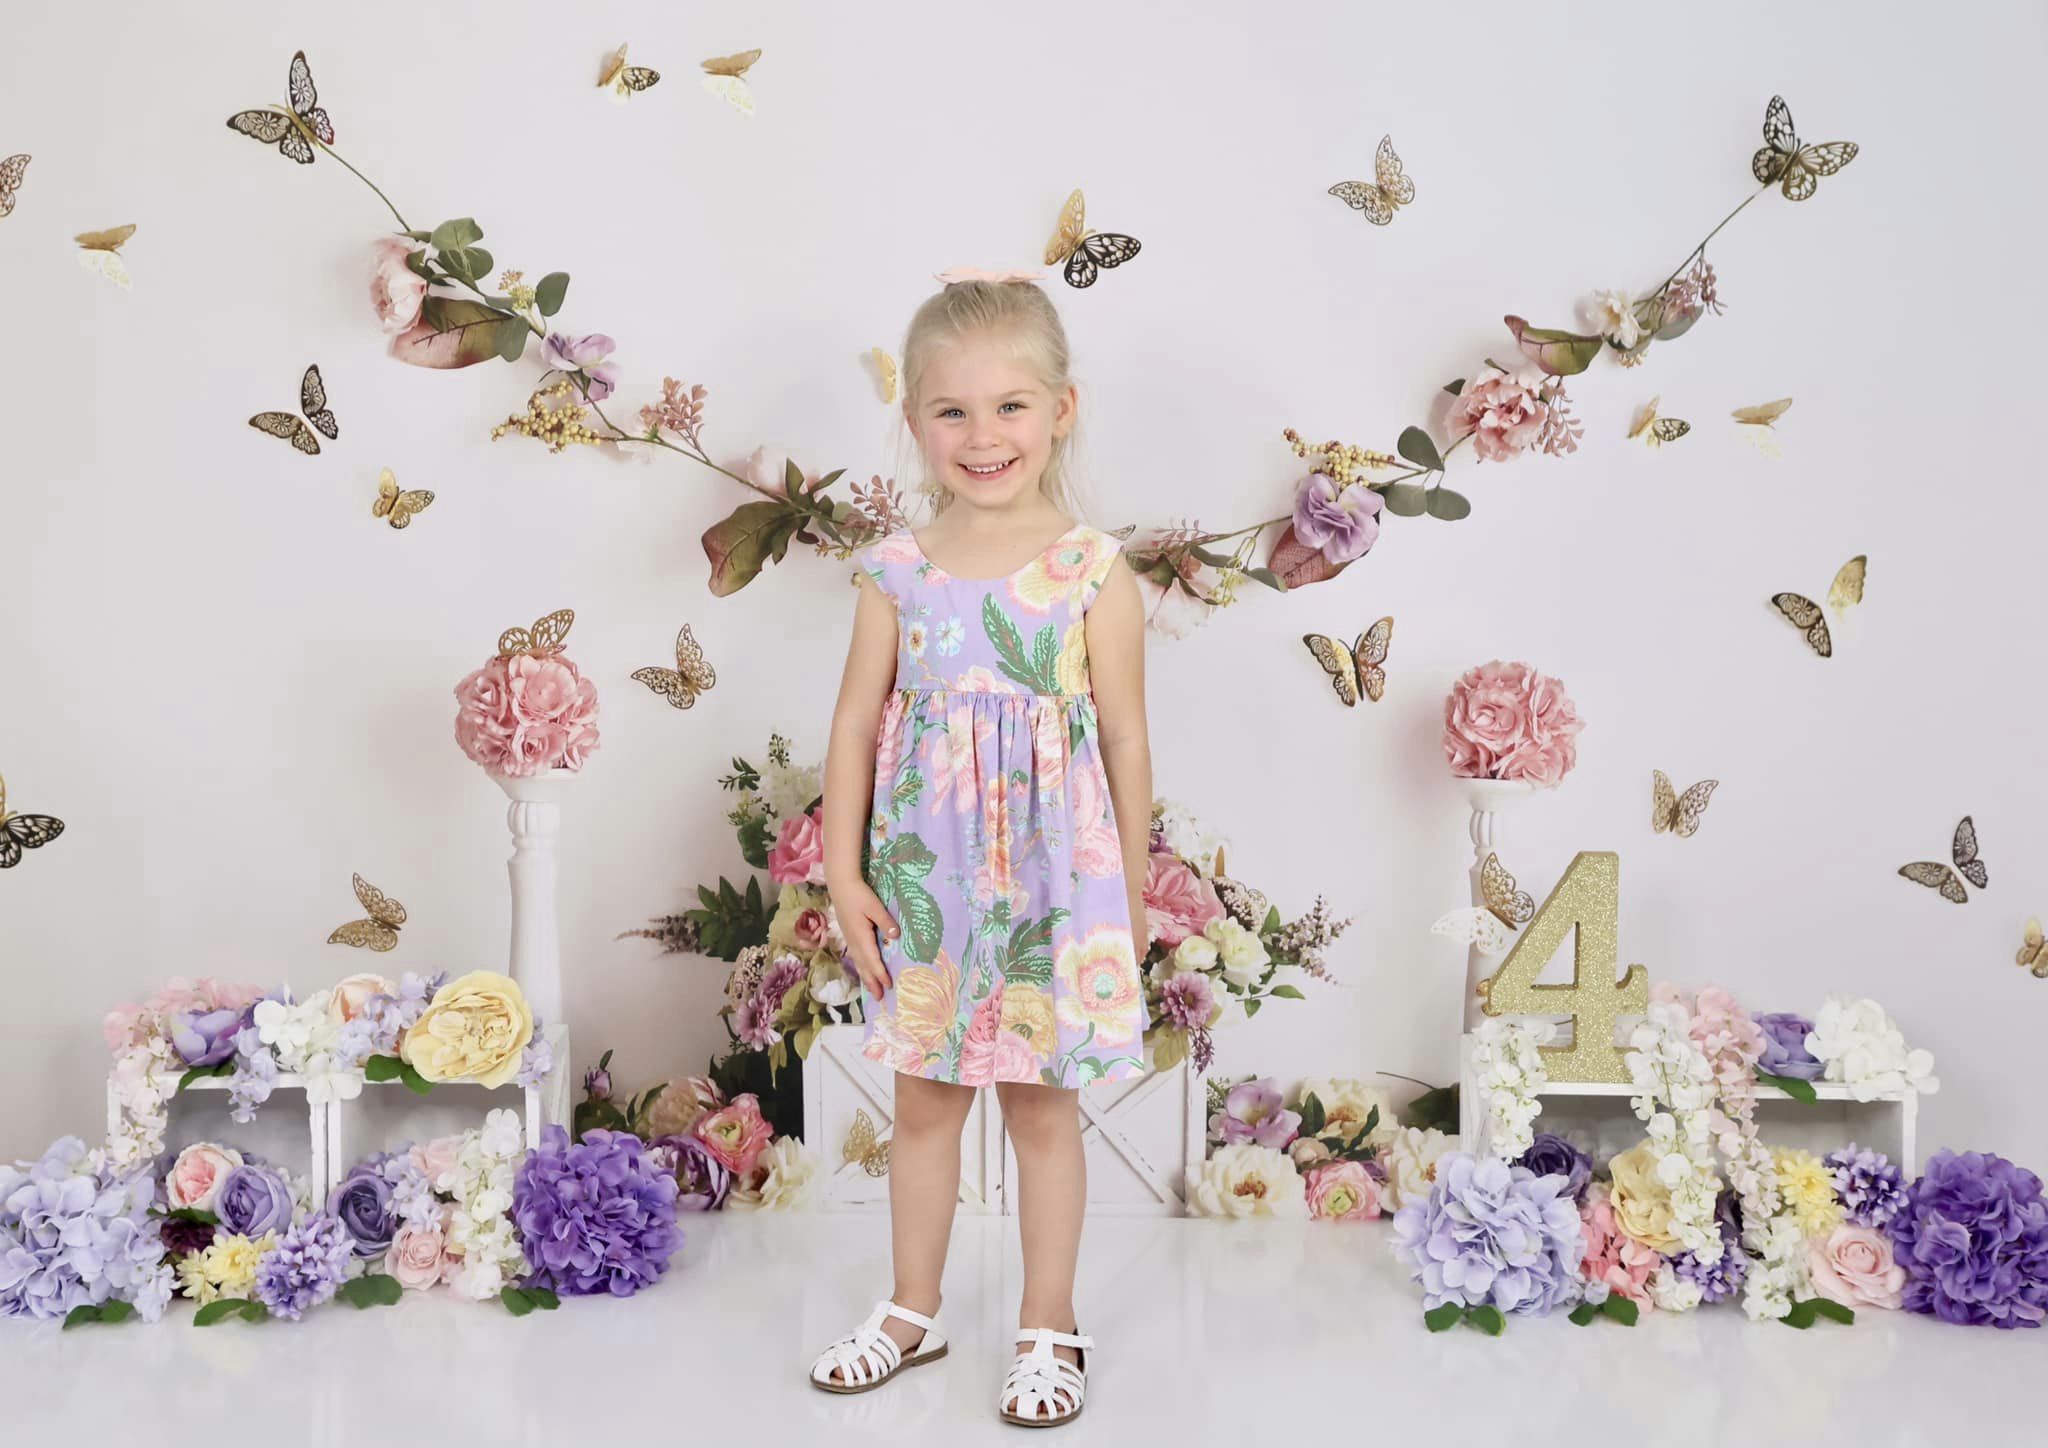 Kate Butterfly Garden Spring Backdrop Designed by Mandy Ringe Photography